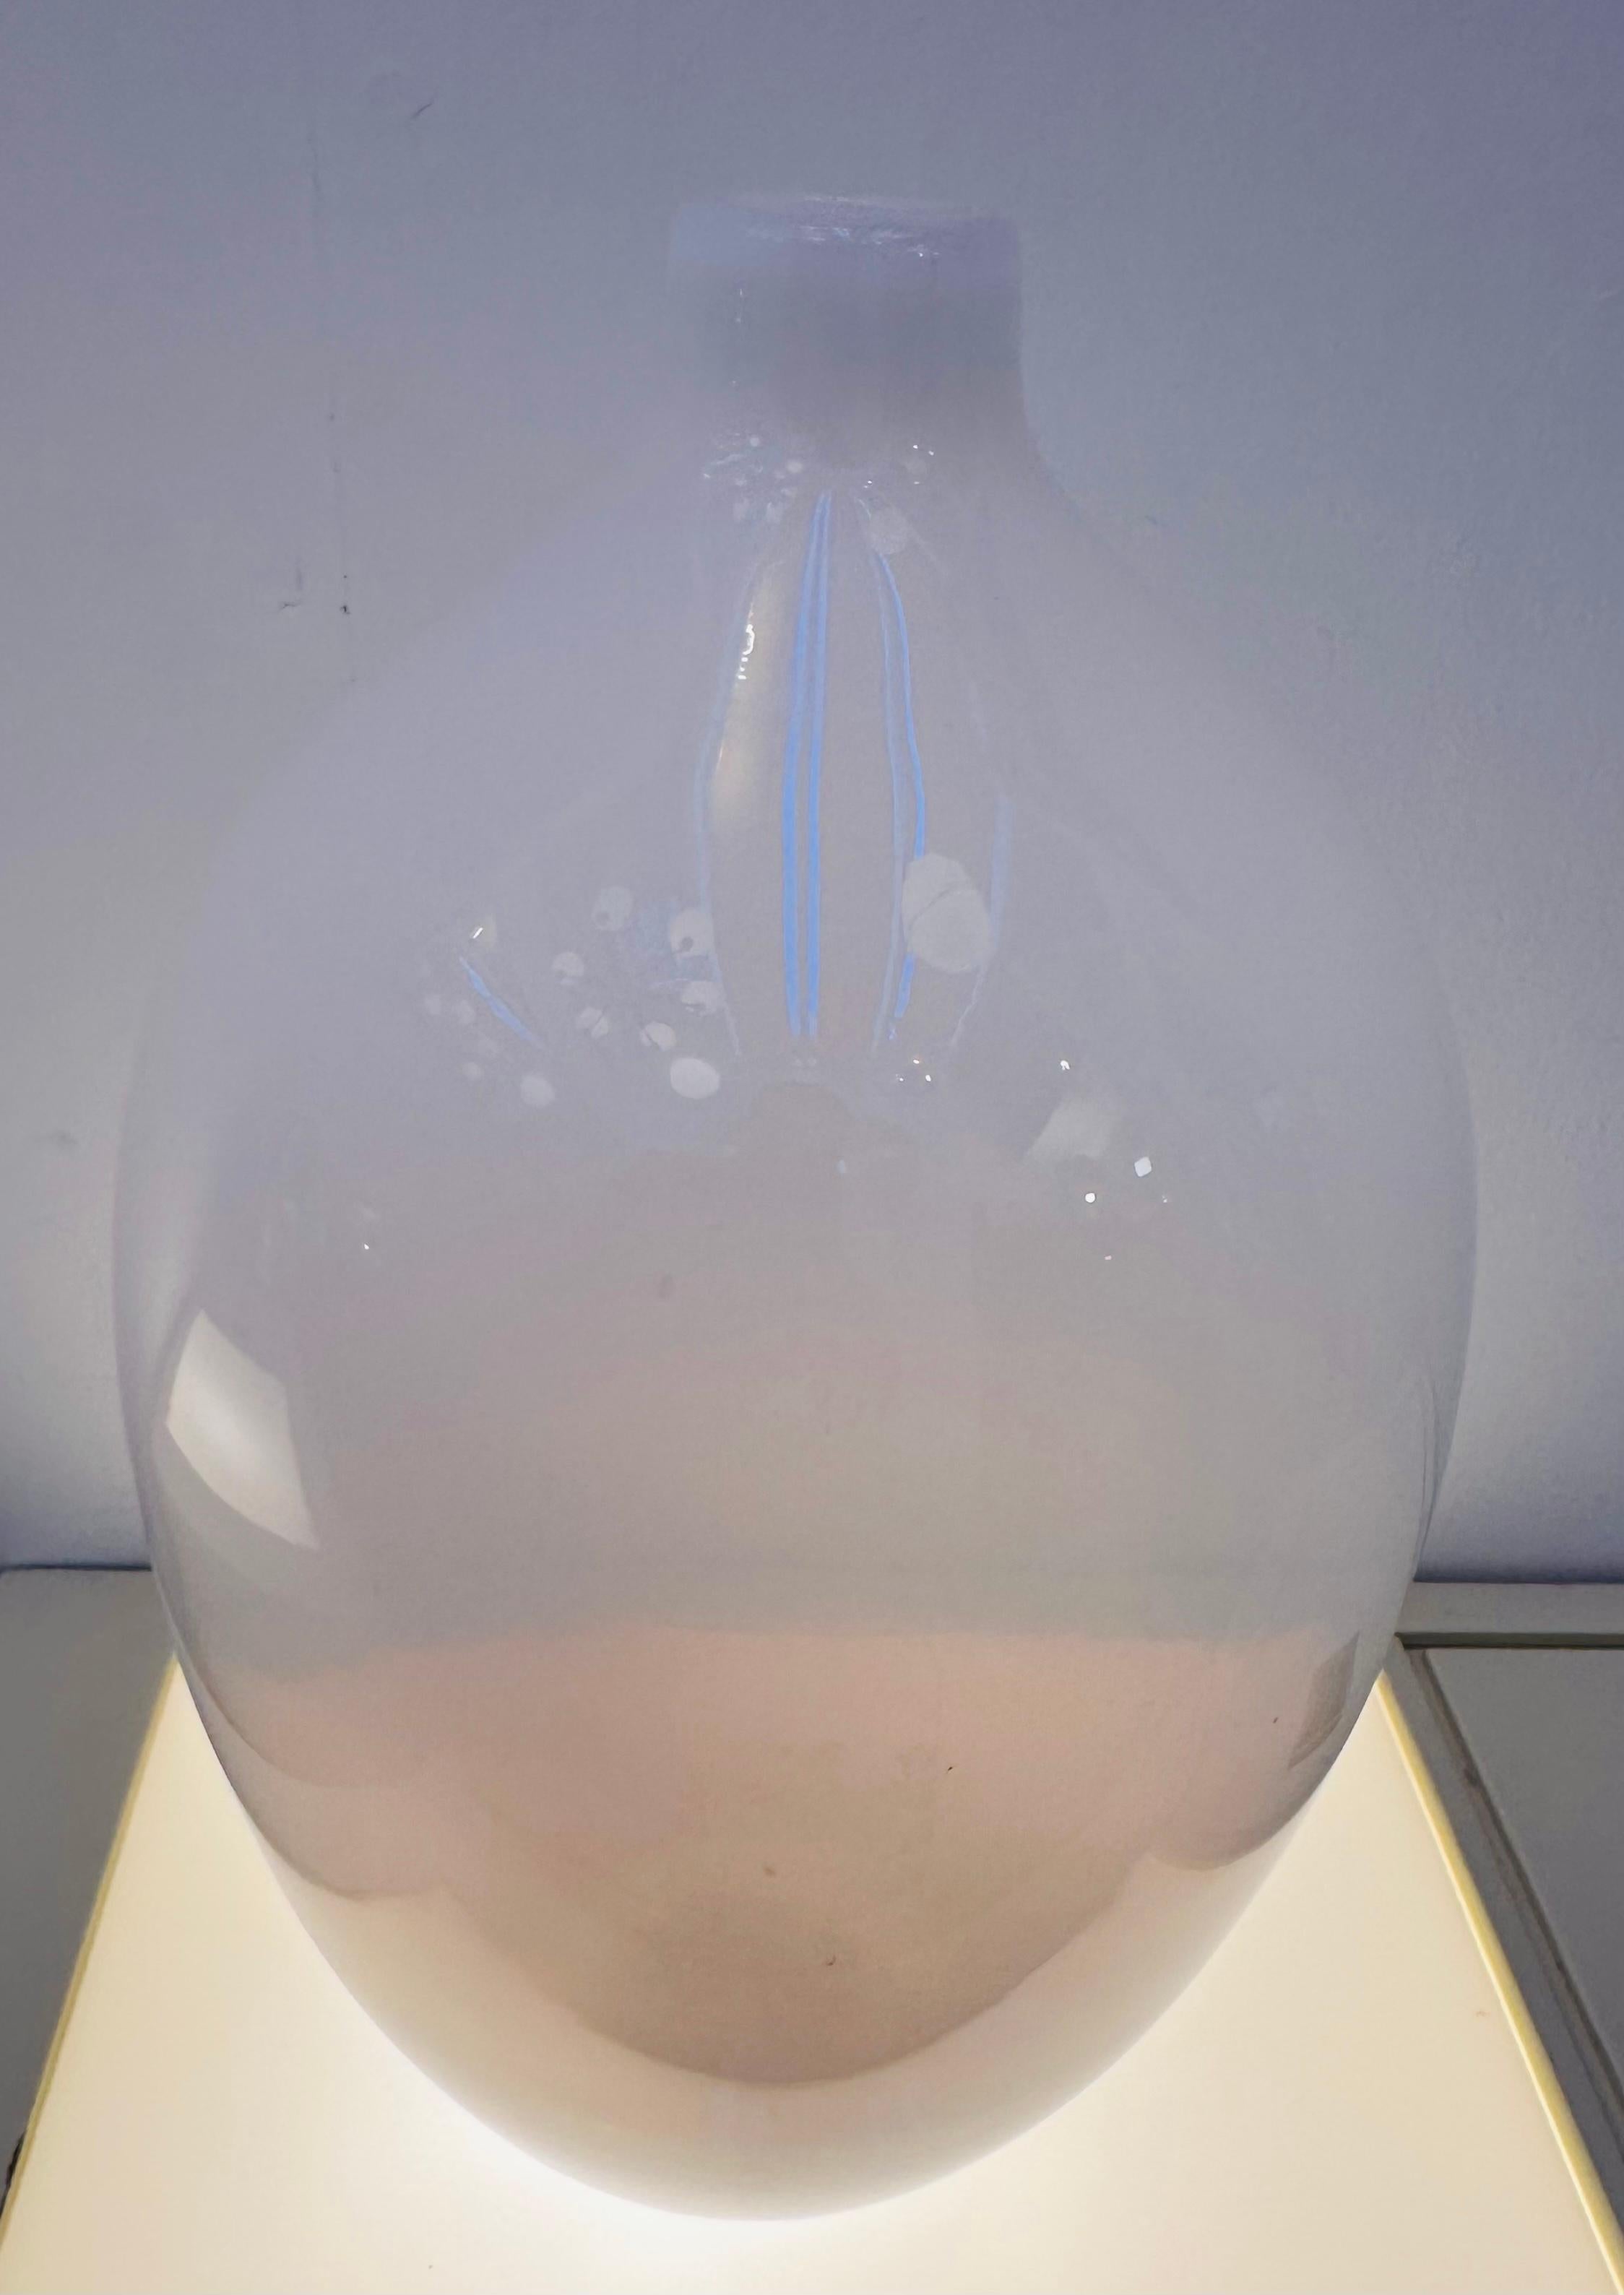 1960s Vintage Italian Milky-White Opalescent Handblown Glass Oviod Form Vase In Good Condition For Sale In London, GB